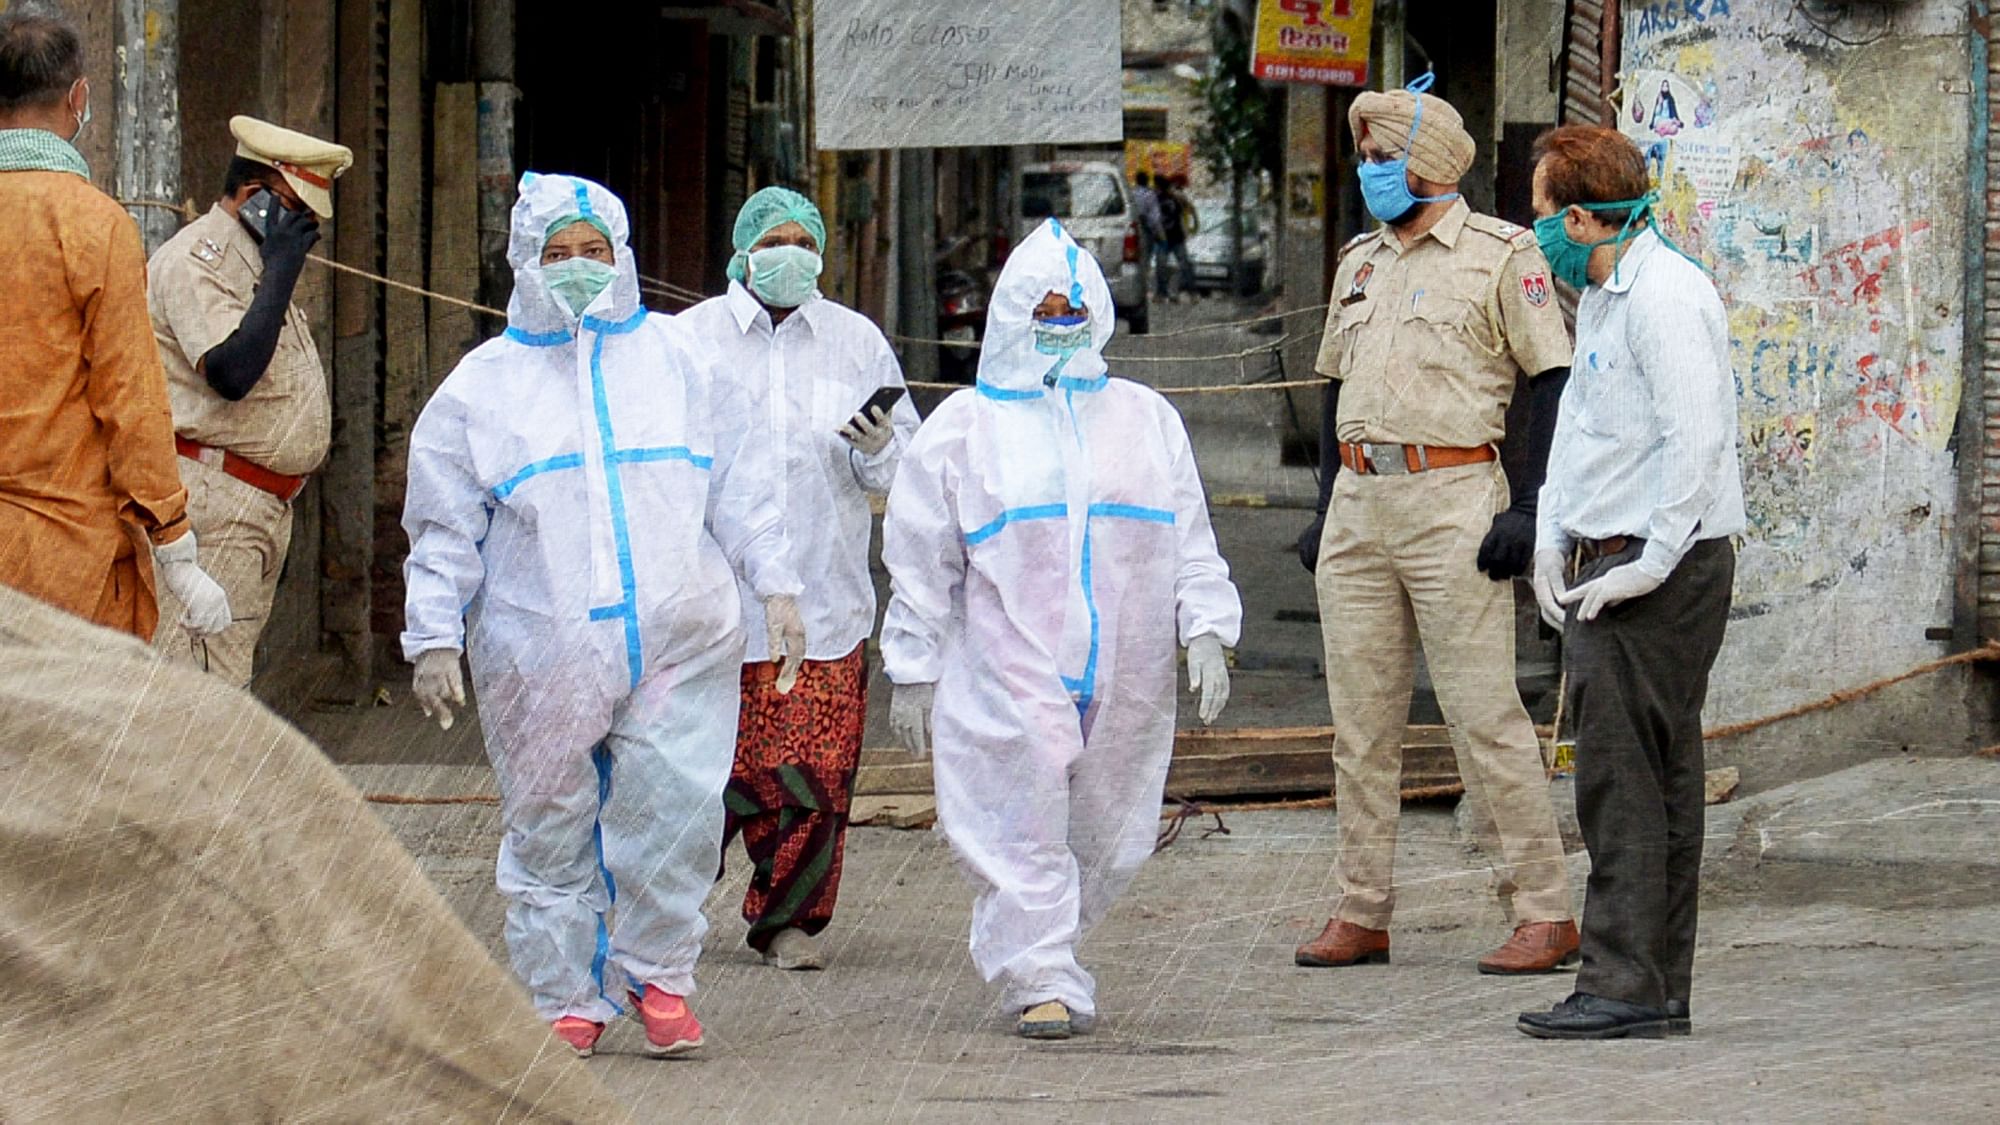 Catch all live updates about the coronavirus pandemic here.